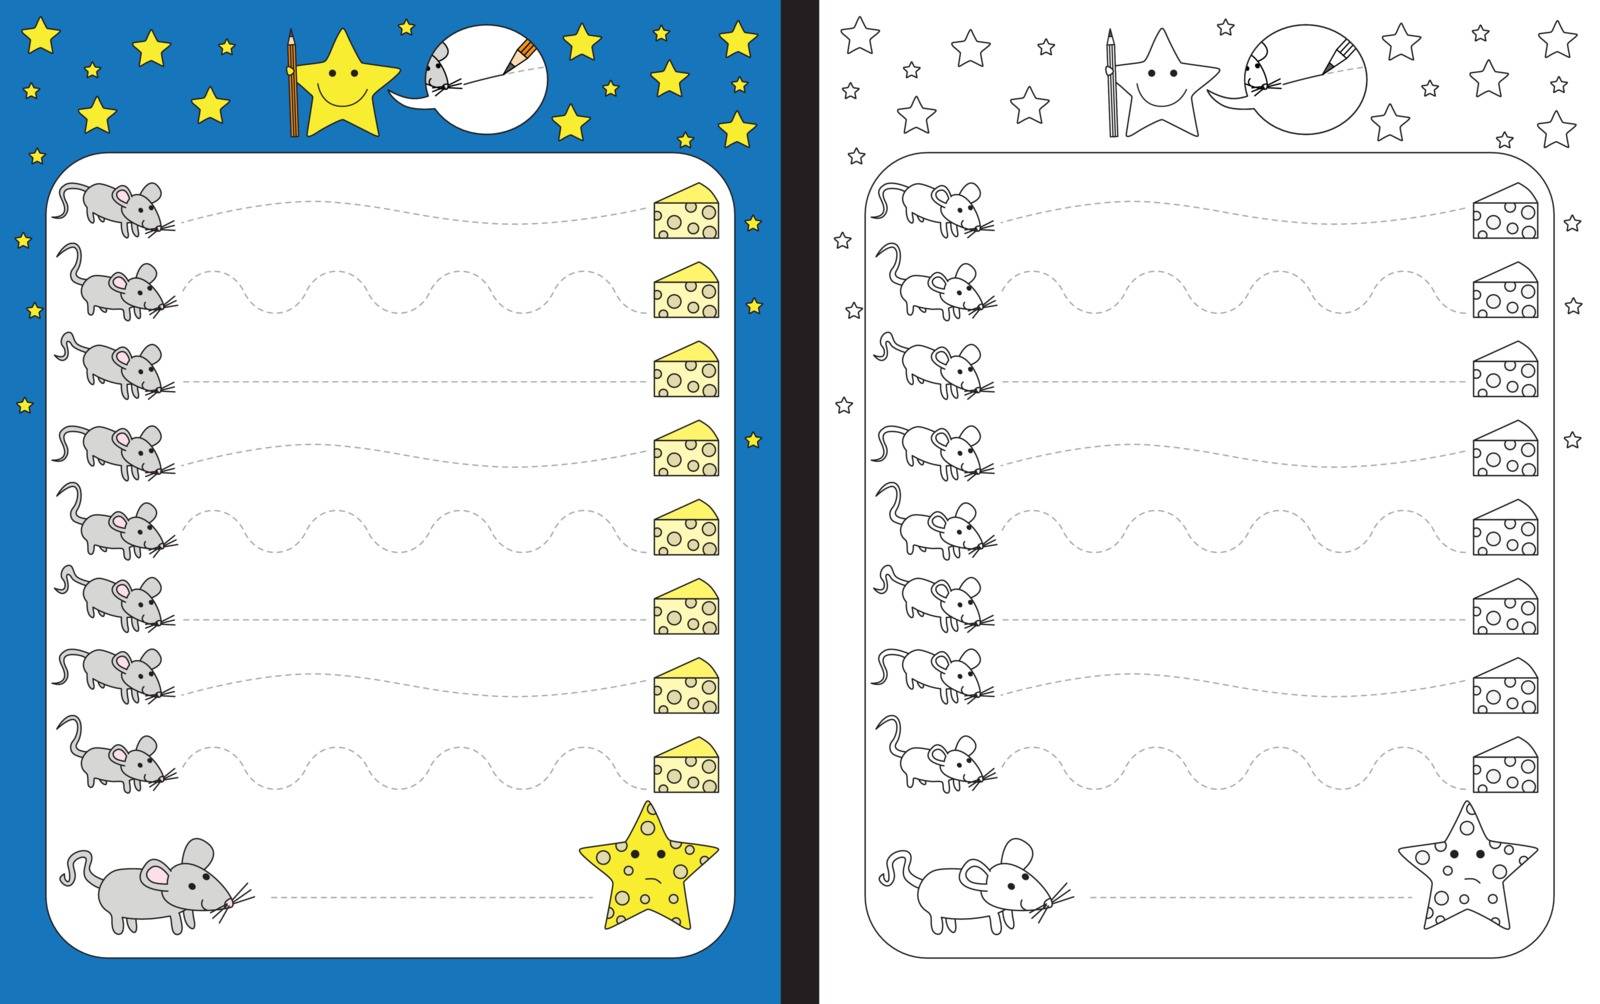 Preschool worksheet for practicing fine motor skills - tracing dashed lines from mice to cheese